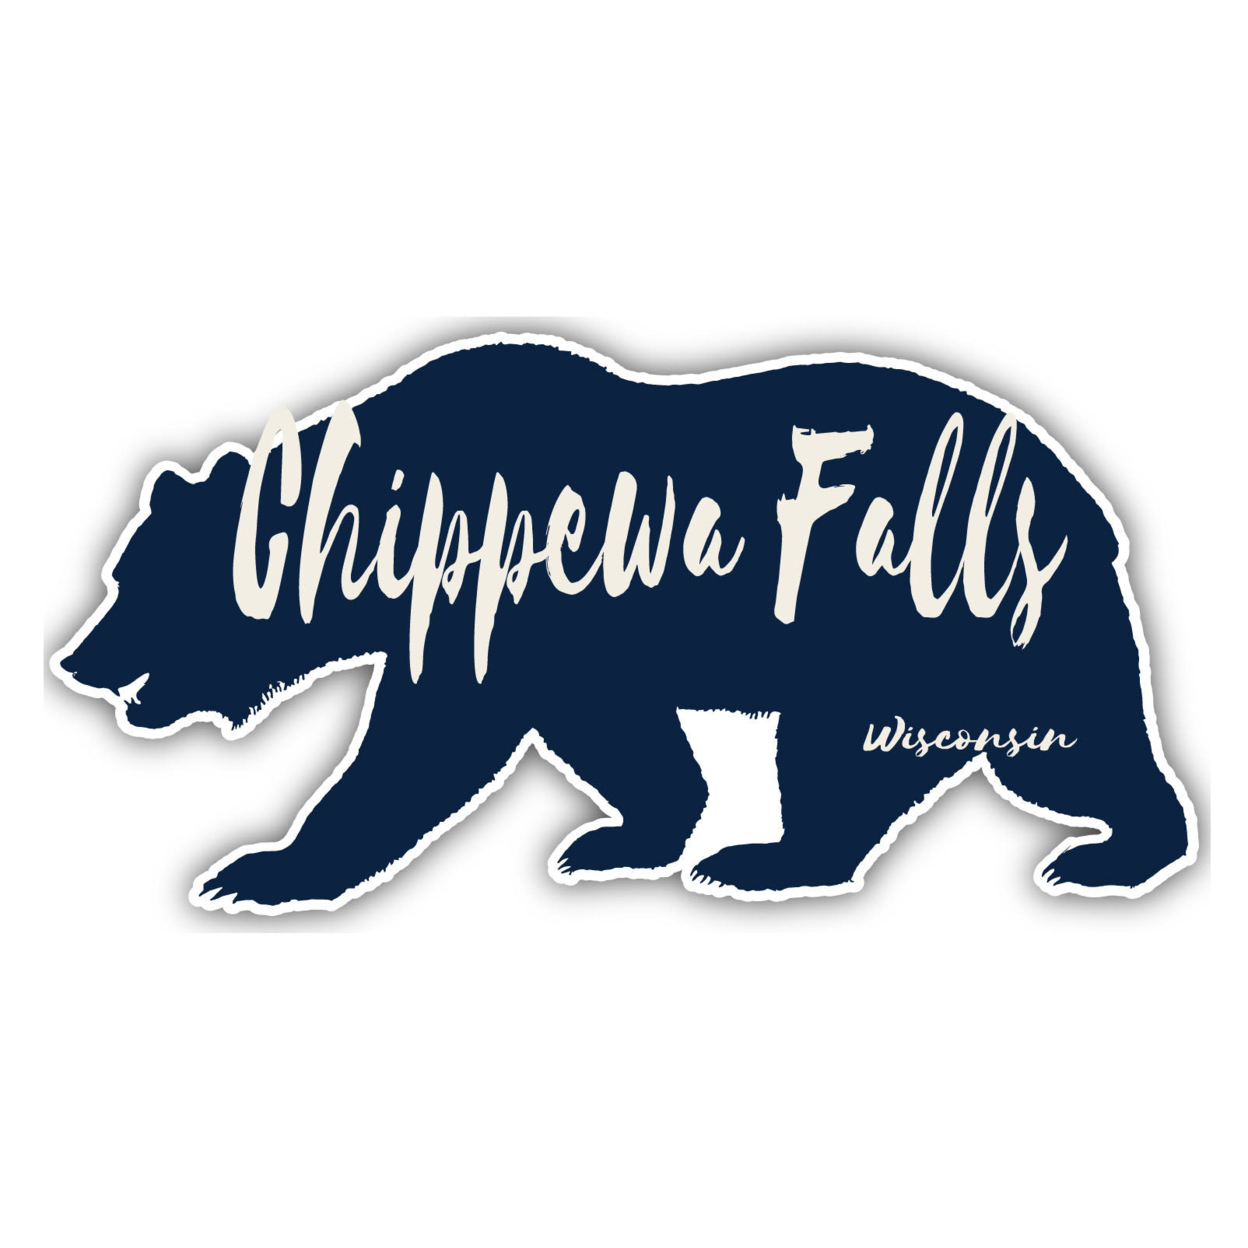 Chippewa Falls Wisconsin Souvenir Decorative Stickers (Choose Theme And Size) - 4-Pack, 8-Inch, Bear